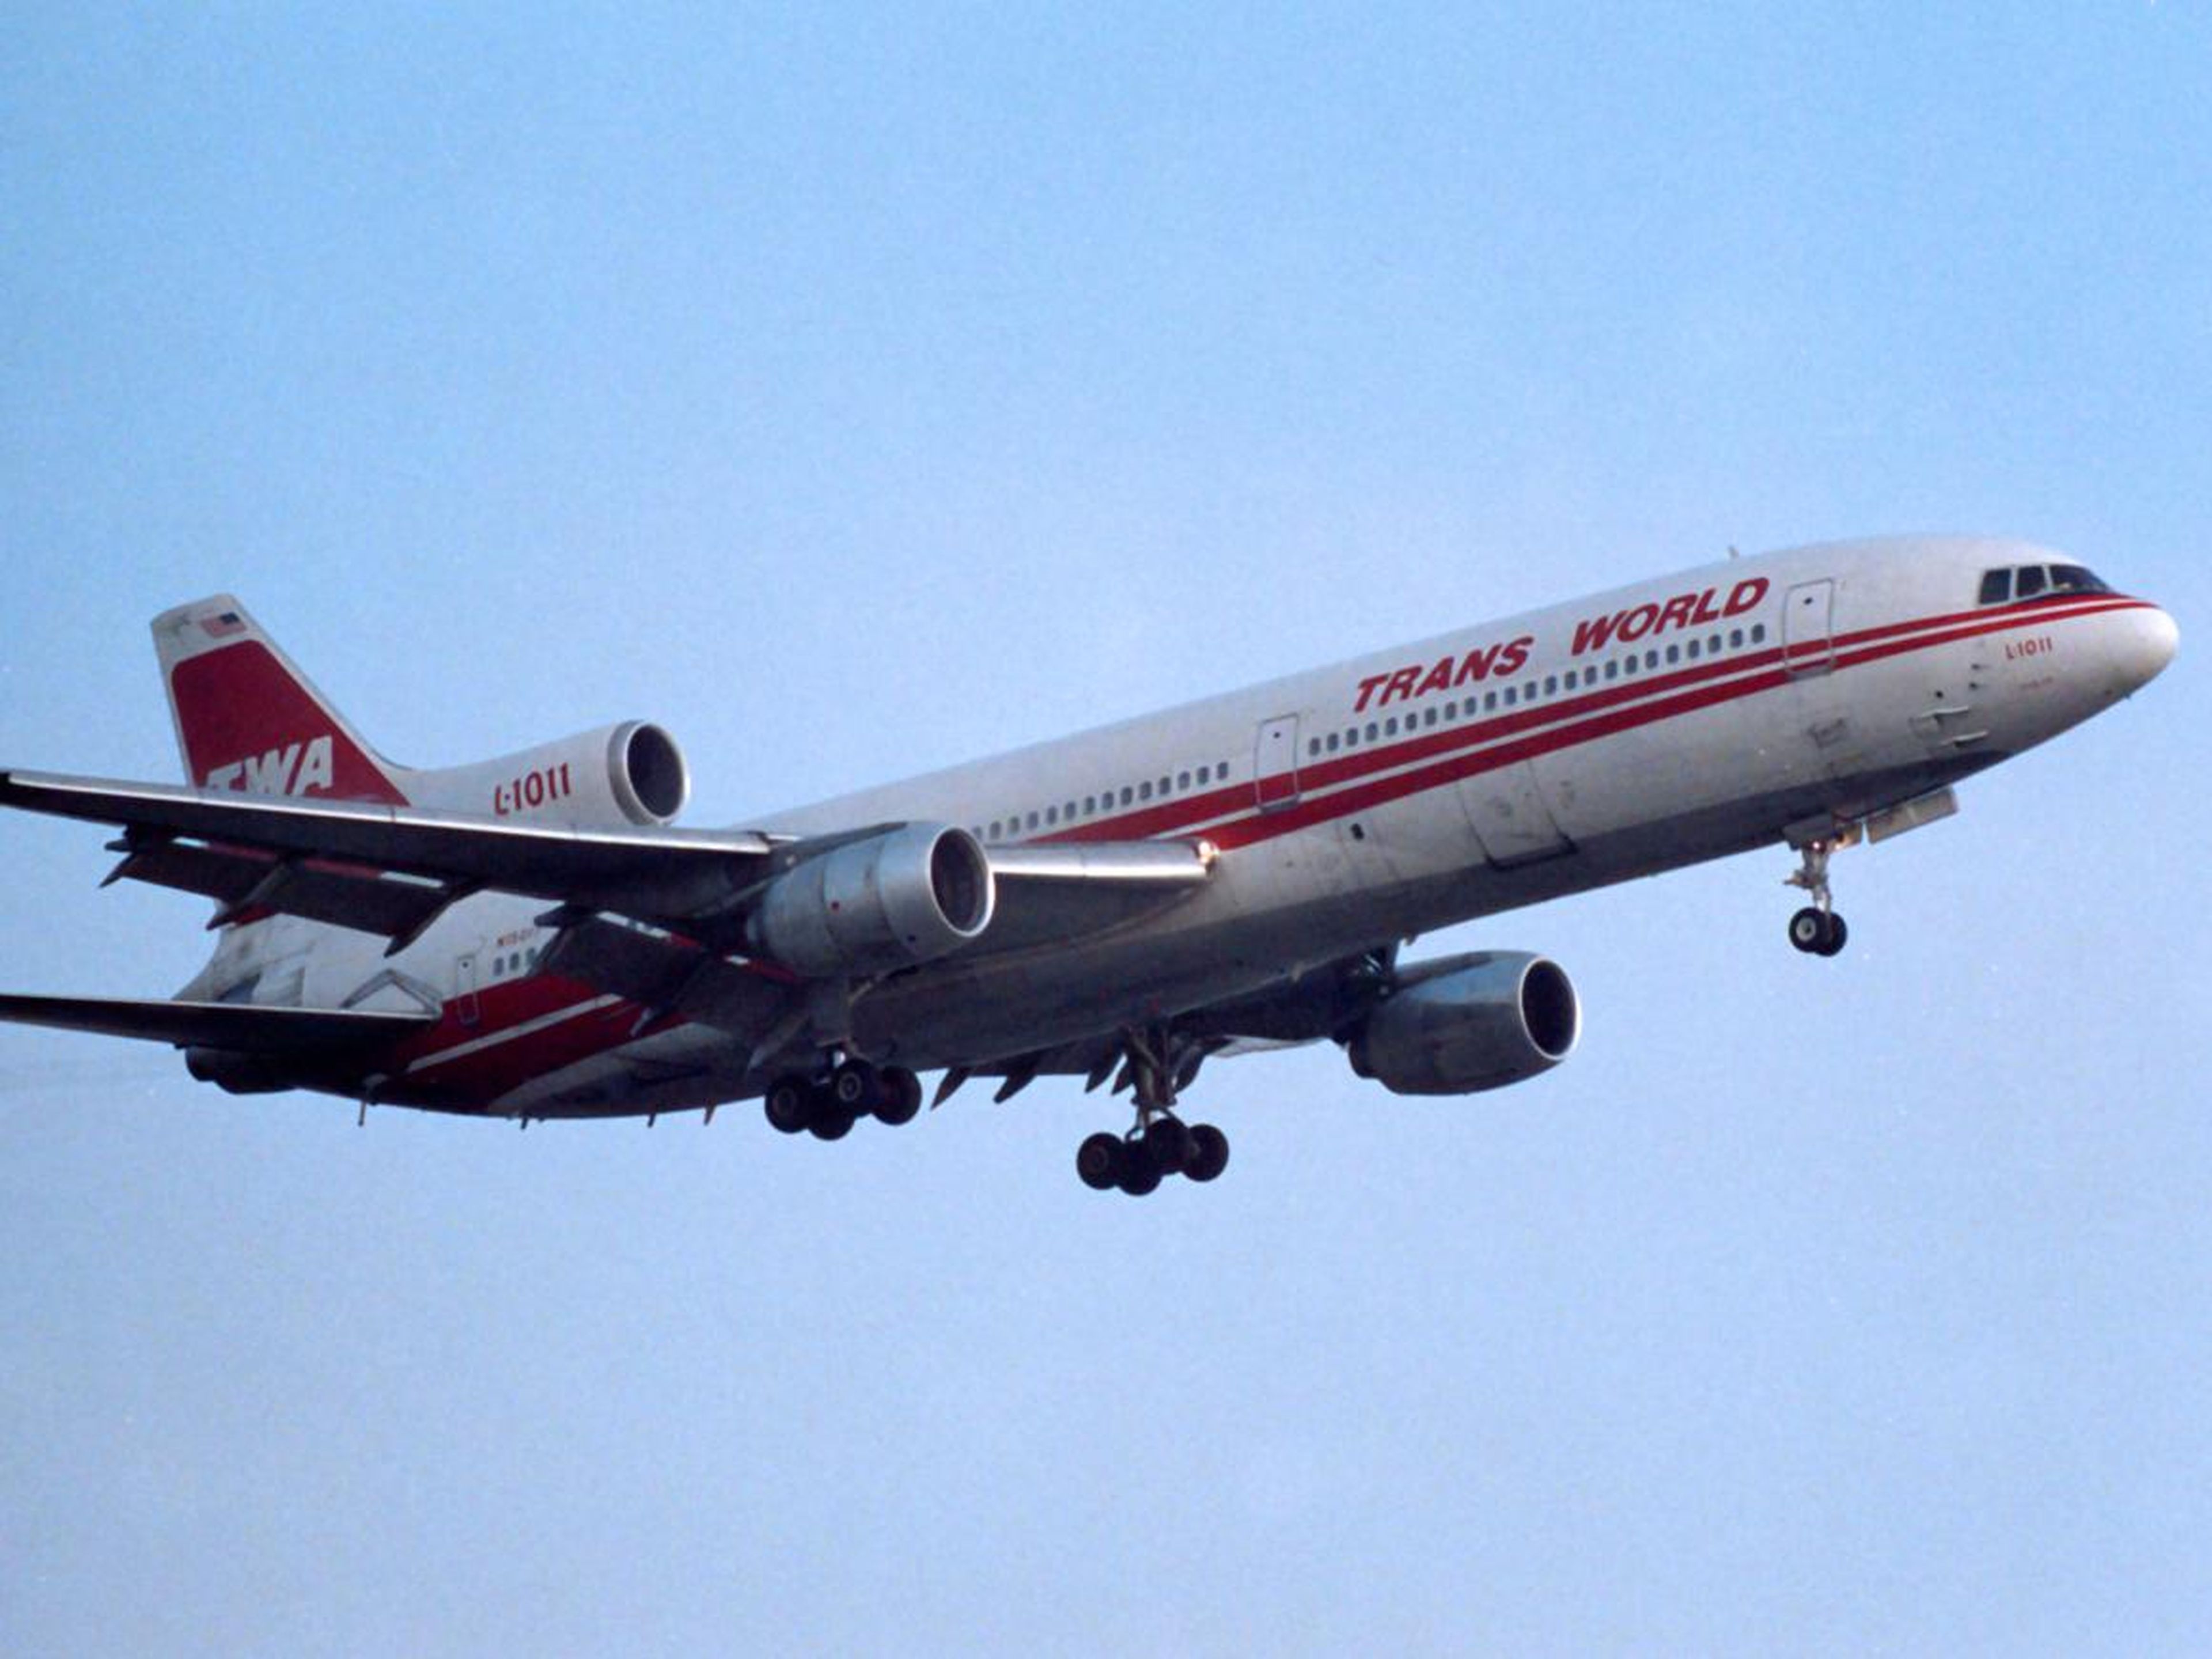 ... the Lockheed L-1011 Tristar, and...